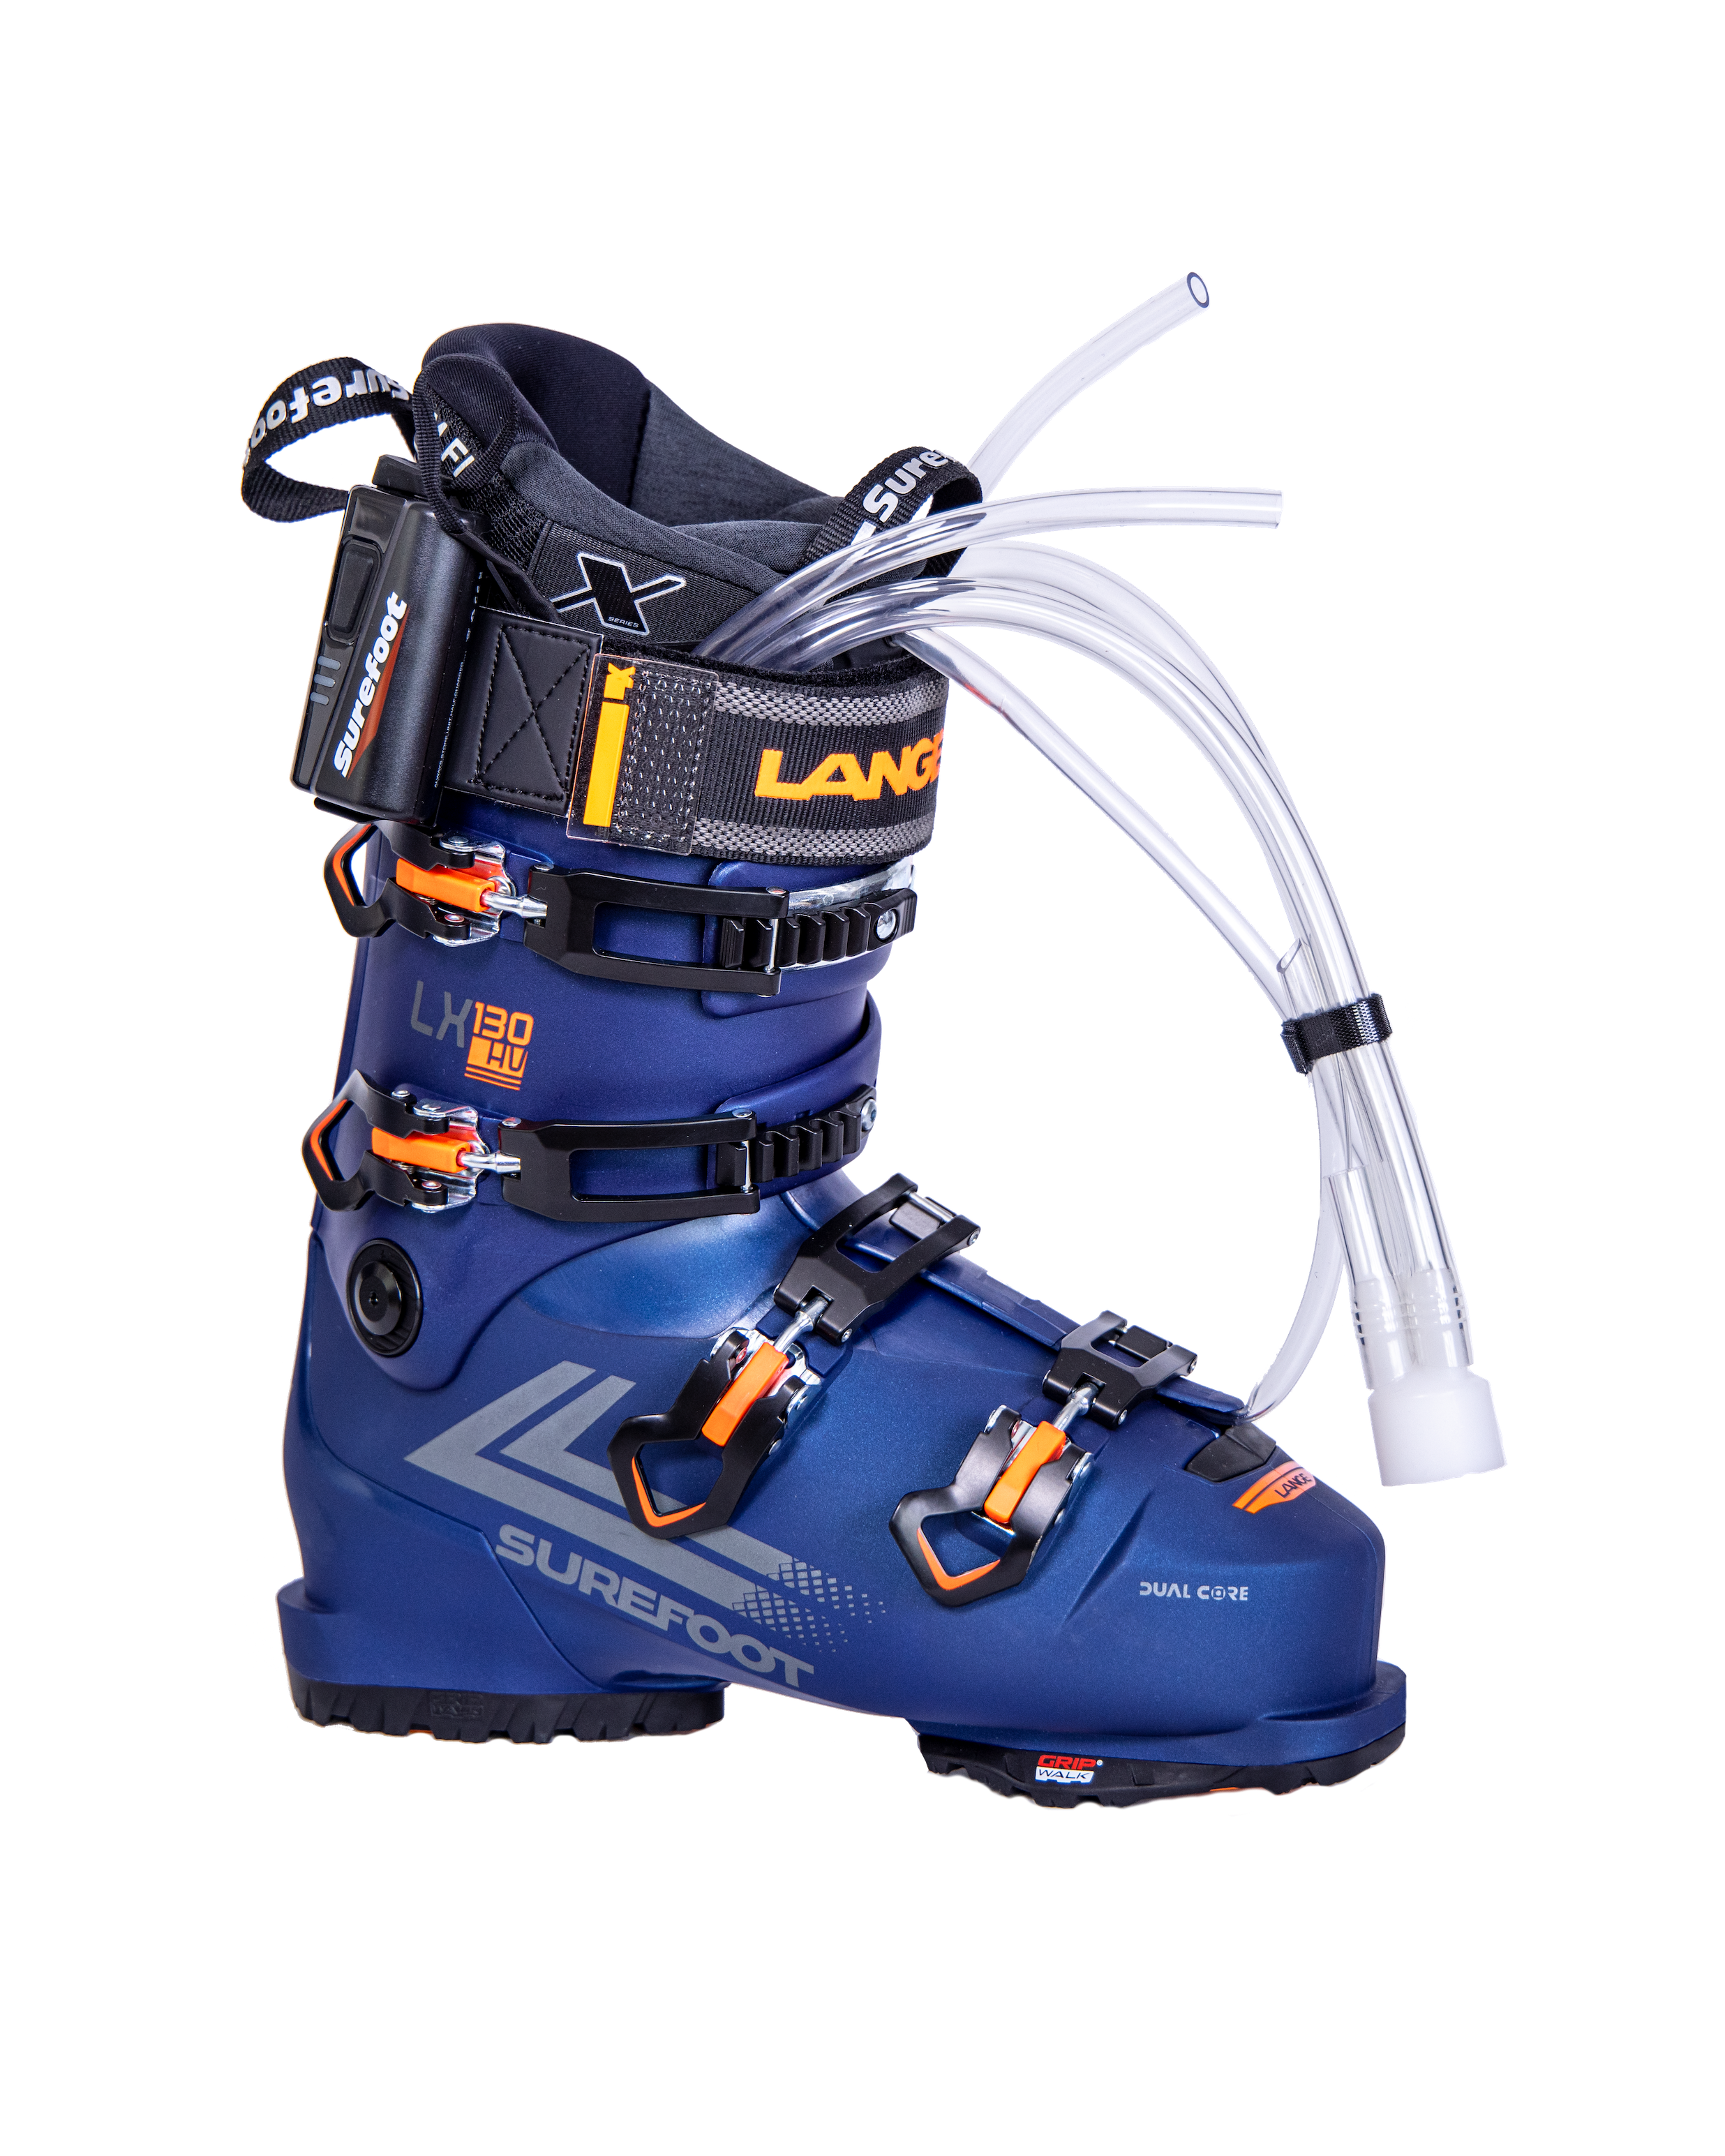 Surefoot Lange LX 130 HV blue ski boot shell with orange accents on buckles and Lange logo in orange on power strap. Plastic tubes coming out for Surefoot memory foam injection into shell lining. Winterheat ski boot heater attached to outside edge.